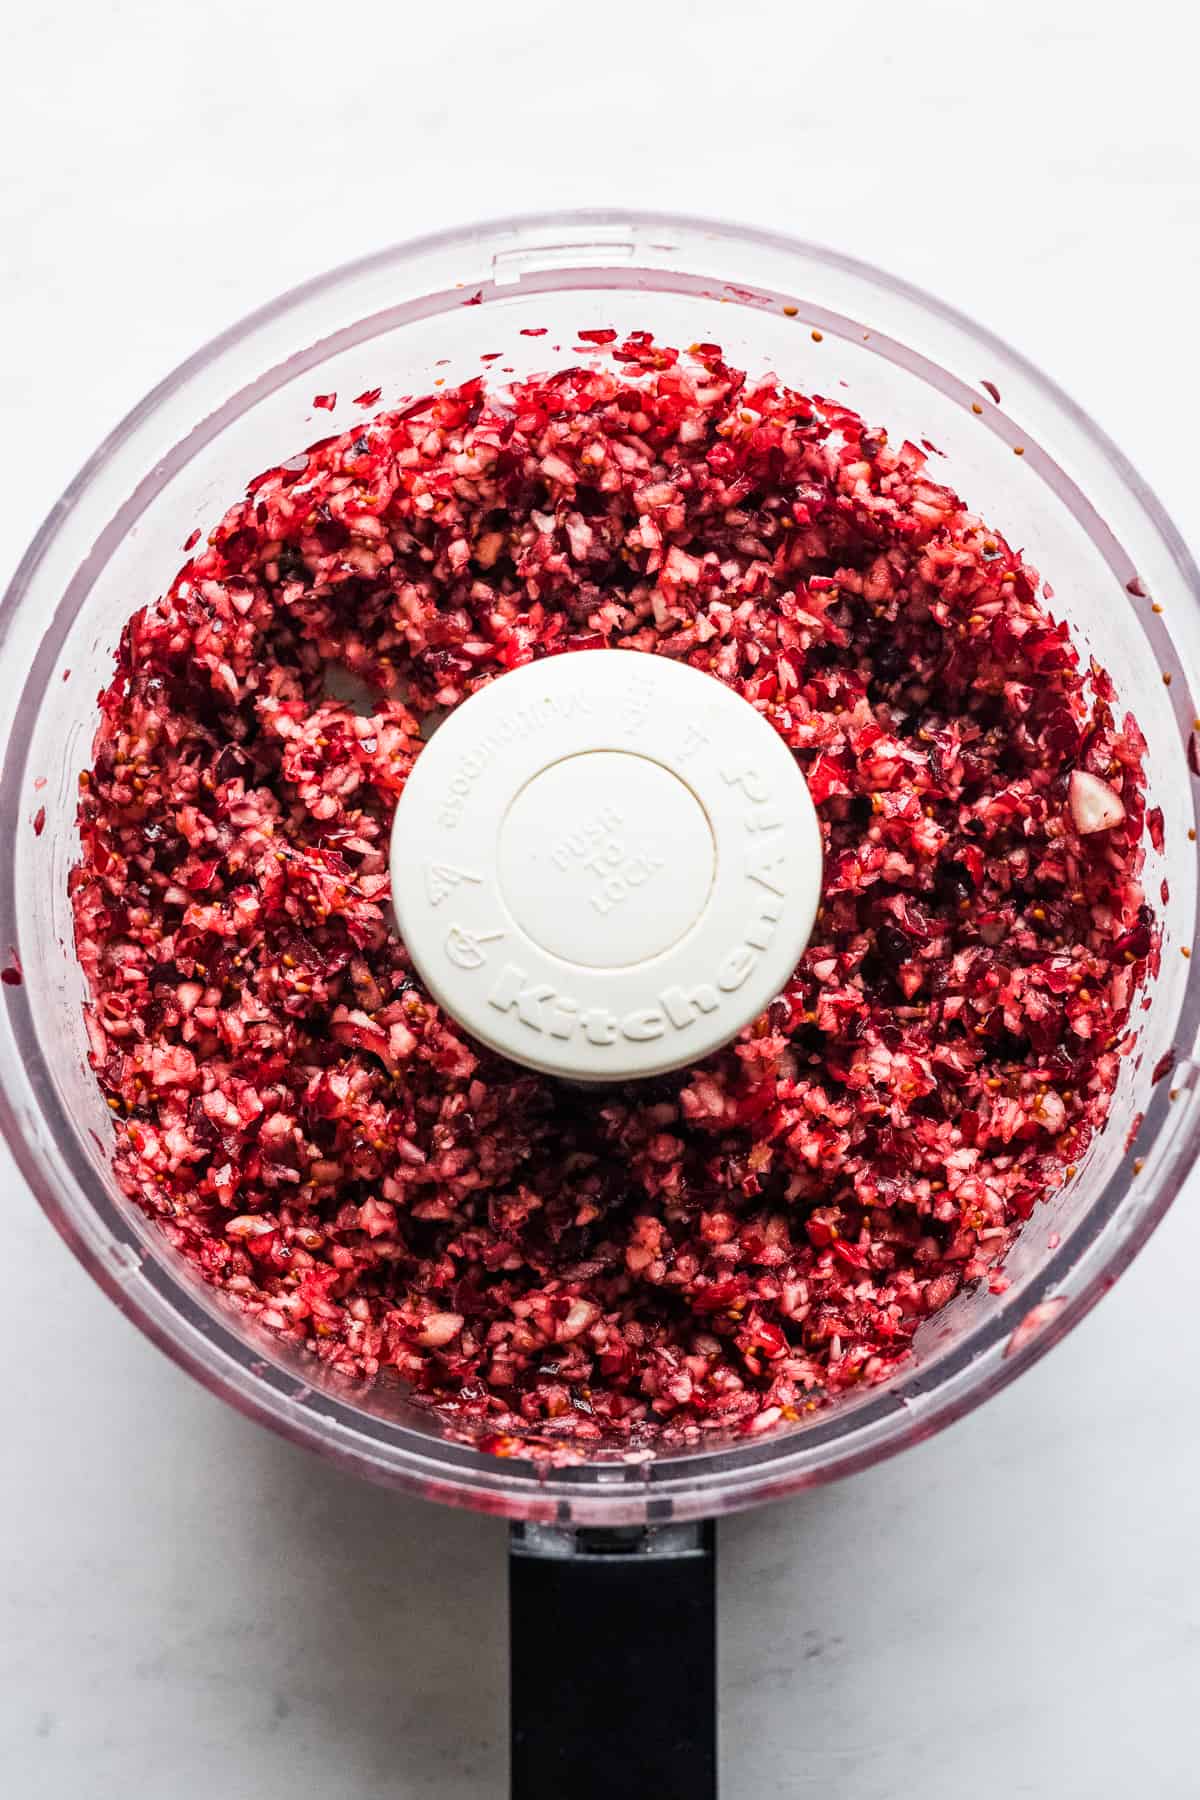 Finely chopped cranberries in a food processor.